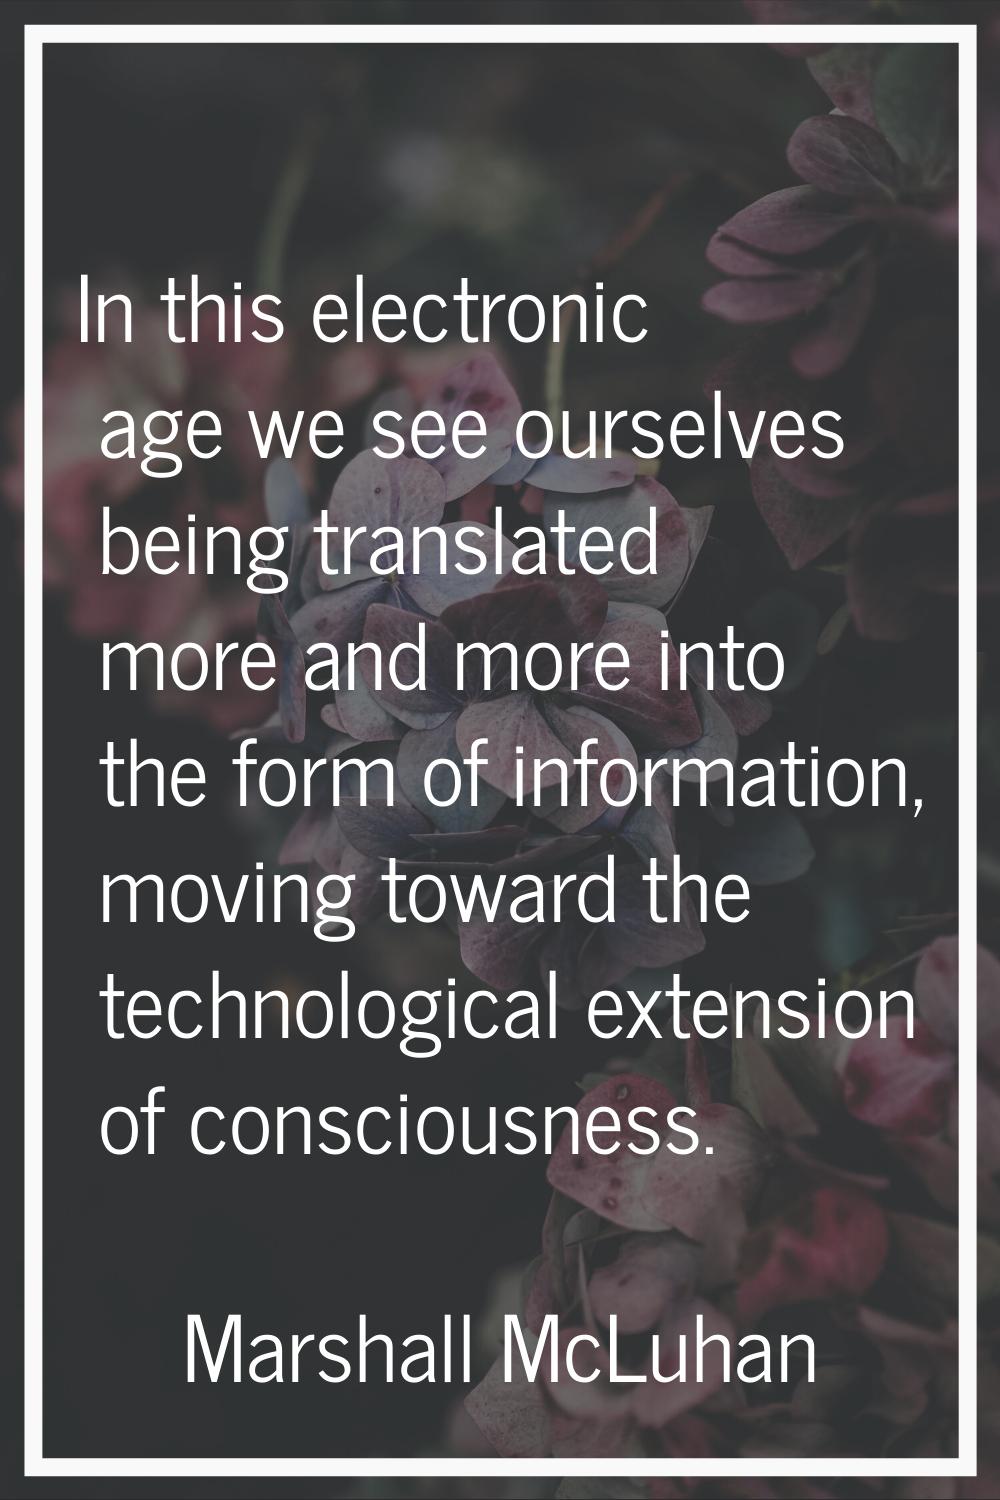 In this electronic age we see ourselves being translated more and more into the form of information